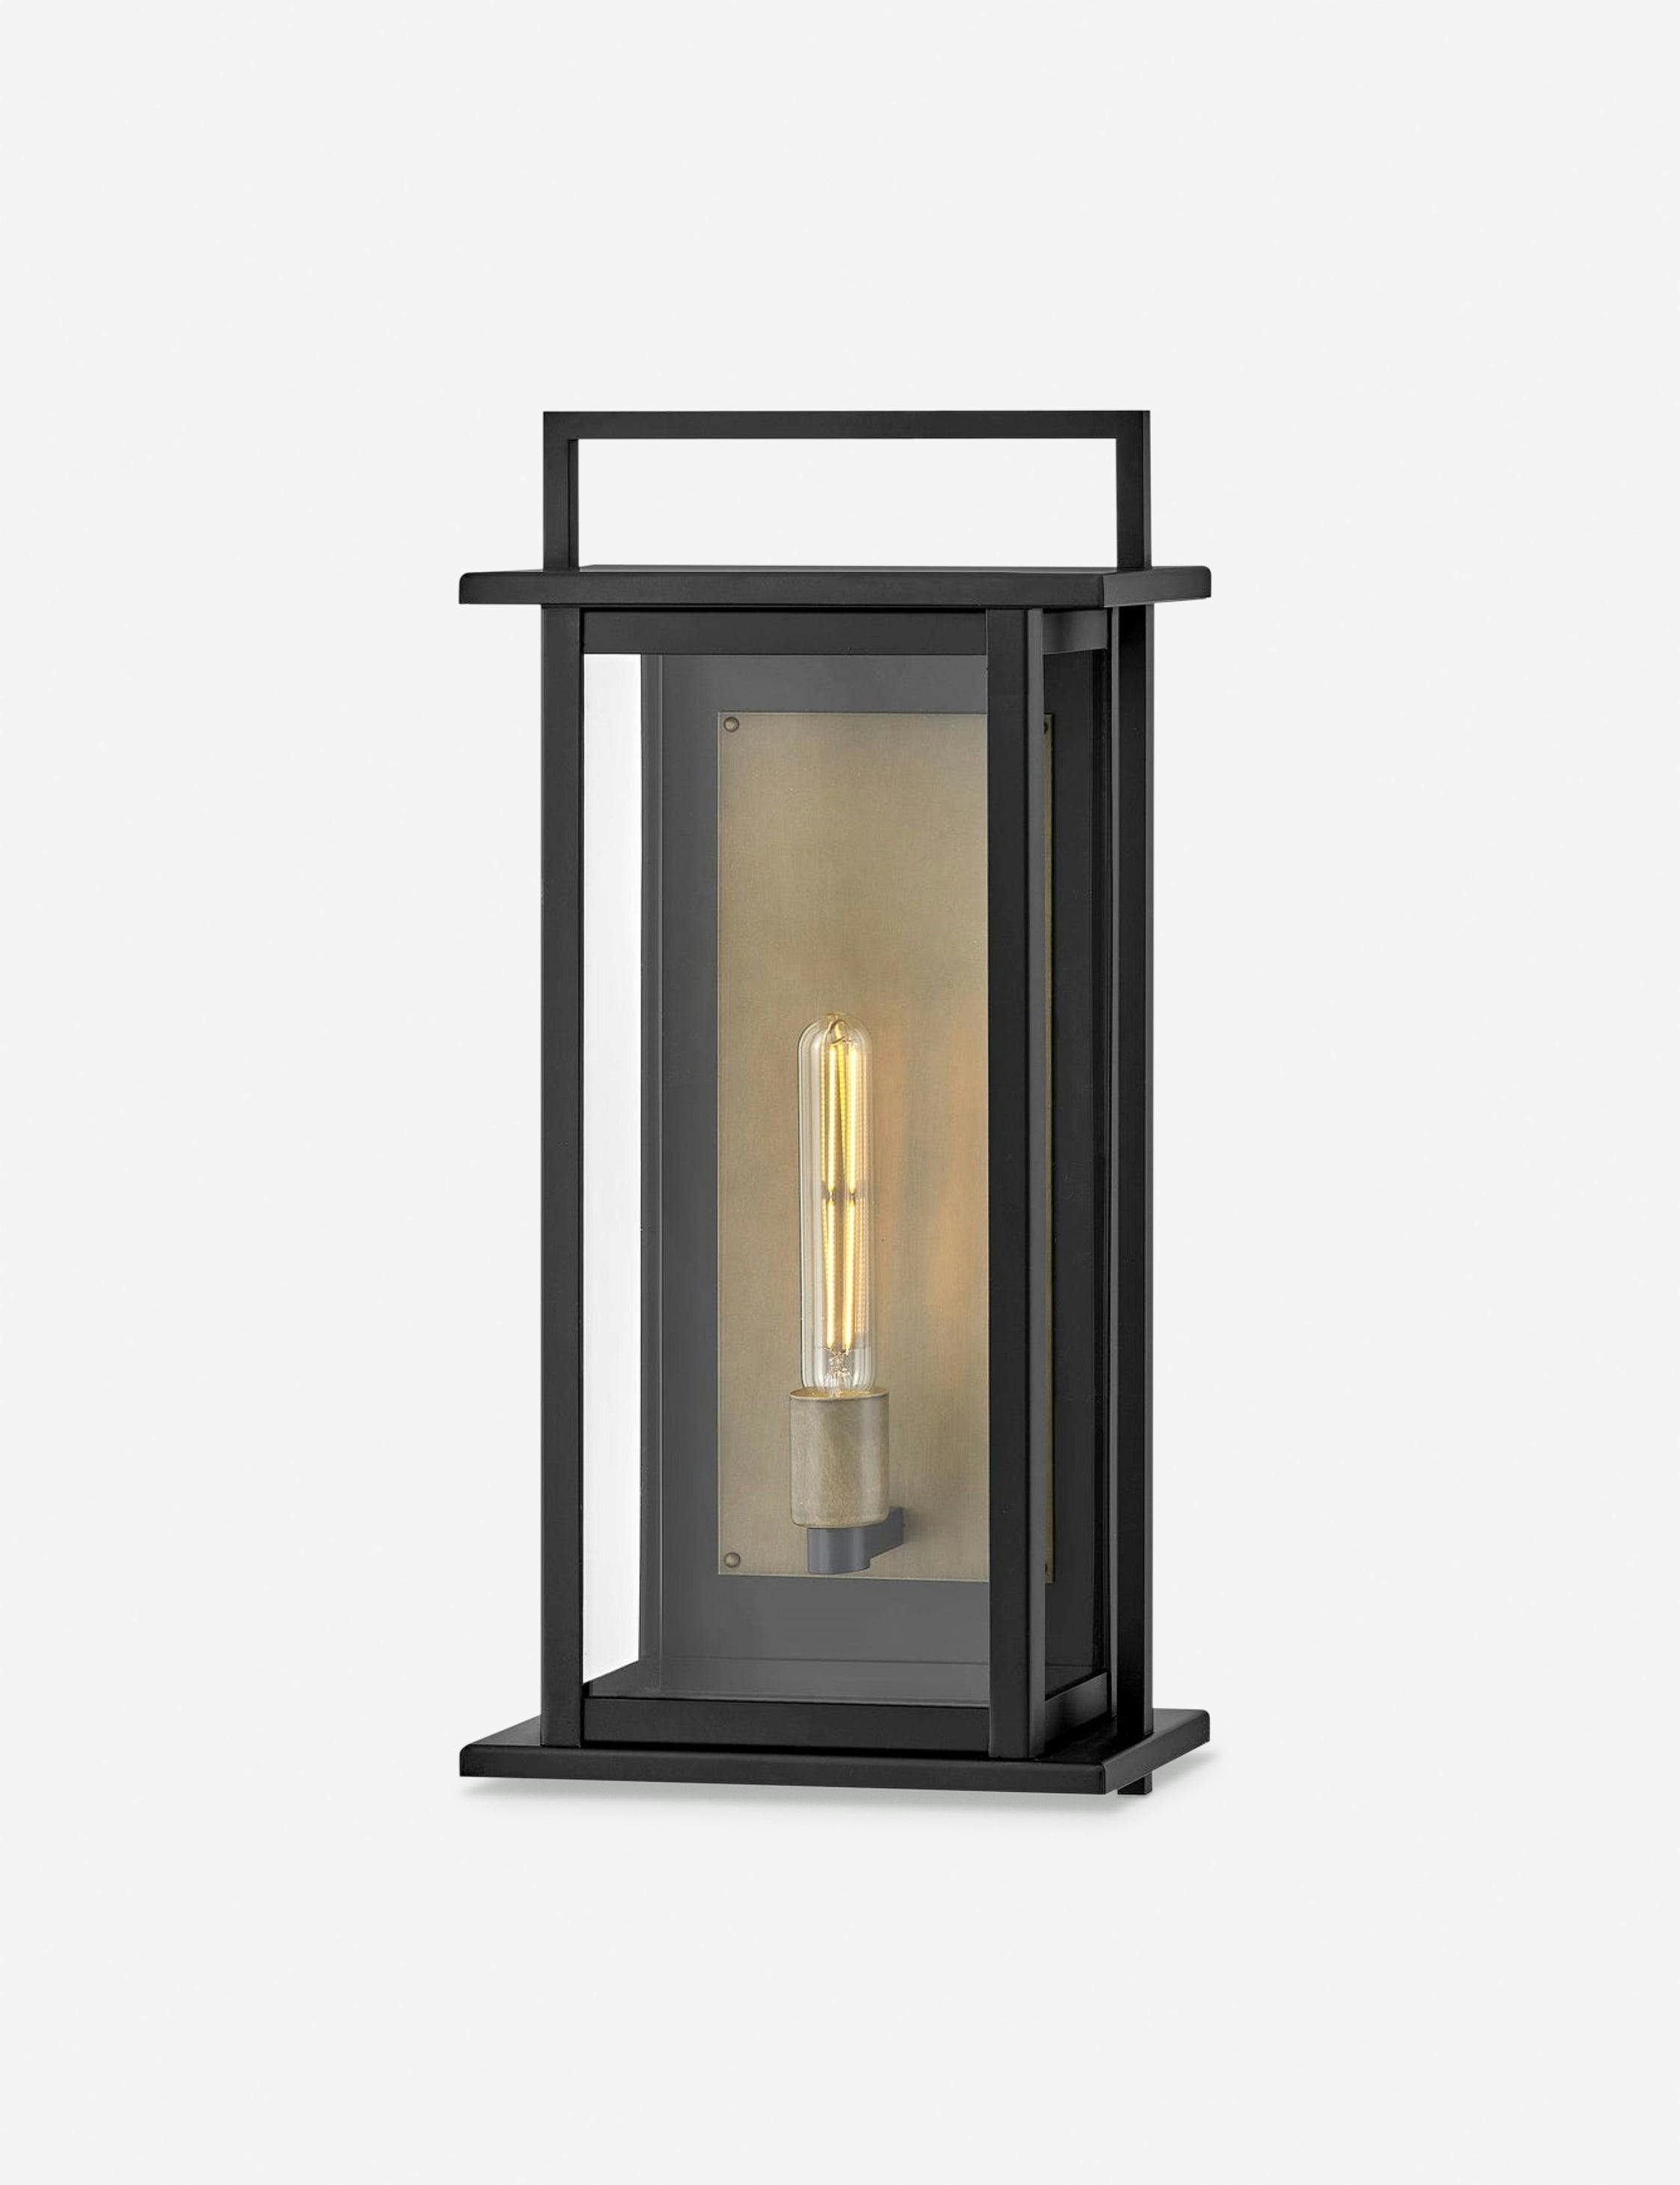 Langston Dimmable Outdoor Wall Sconce in Black and Bronze